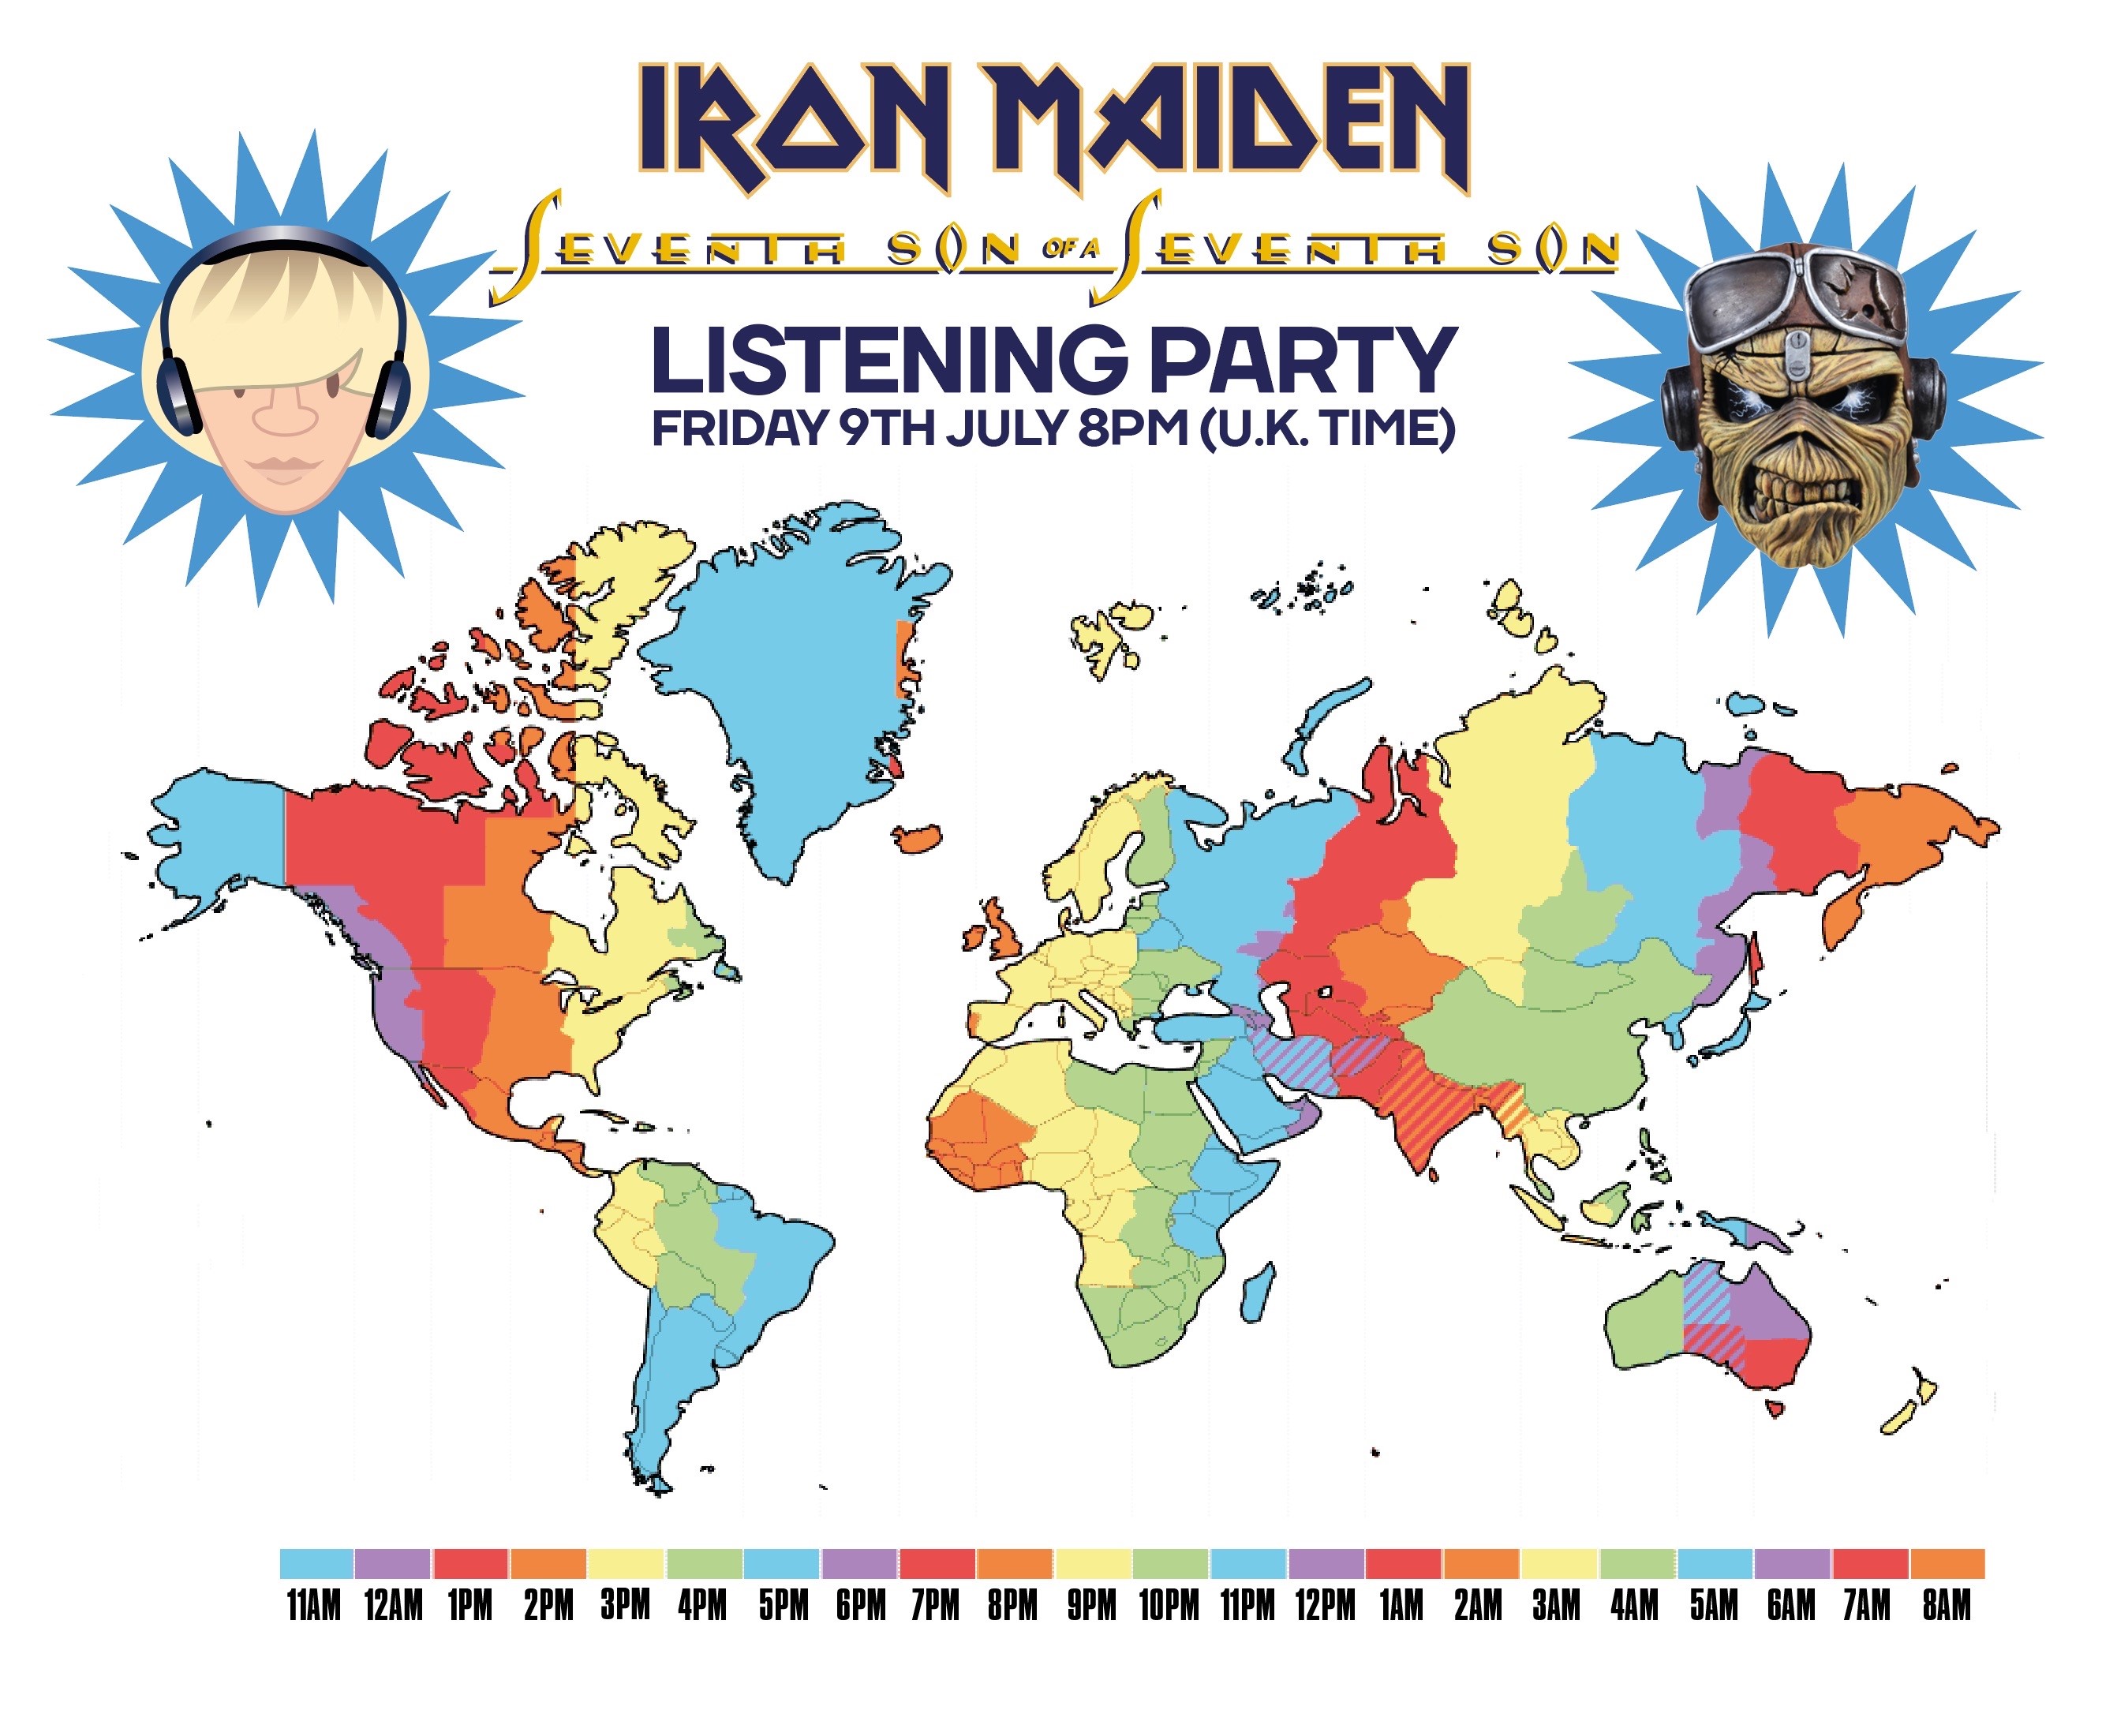 Maiden on Twitter: "Time zone map for Friday's @LlSTENlNG_PARTY ... Join us at 8pm BST with your vinyl, cassette, CD or ready go - or you can always